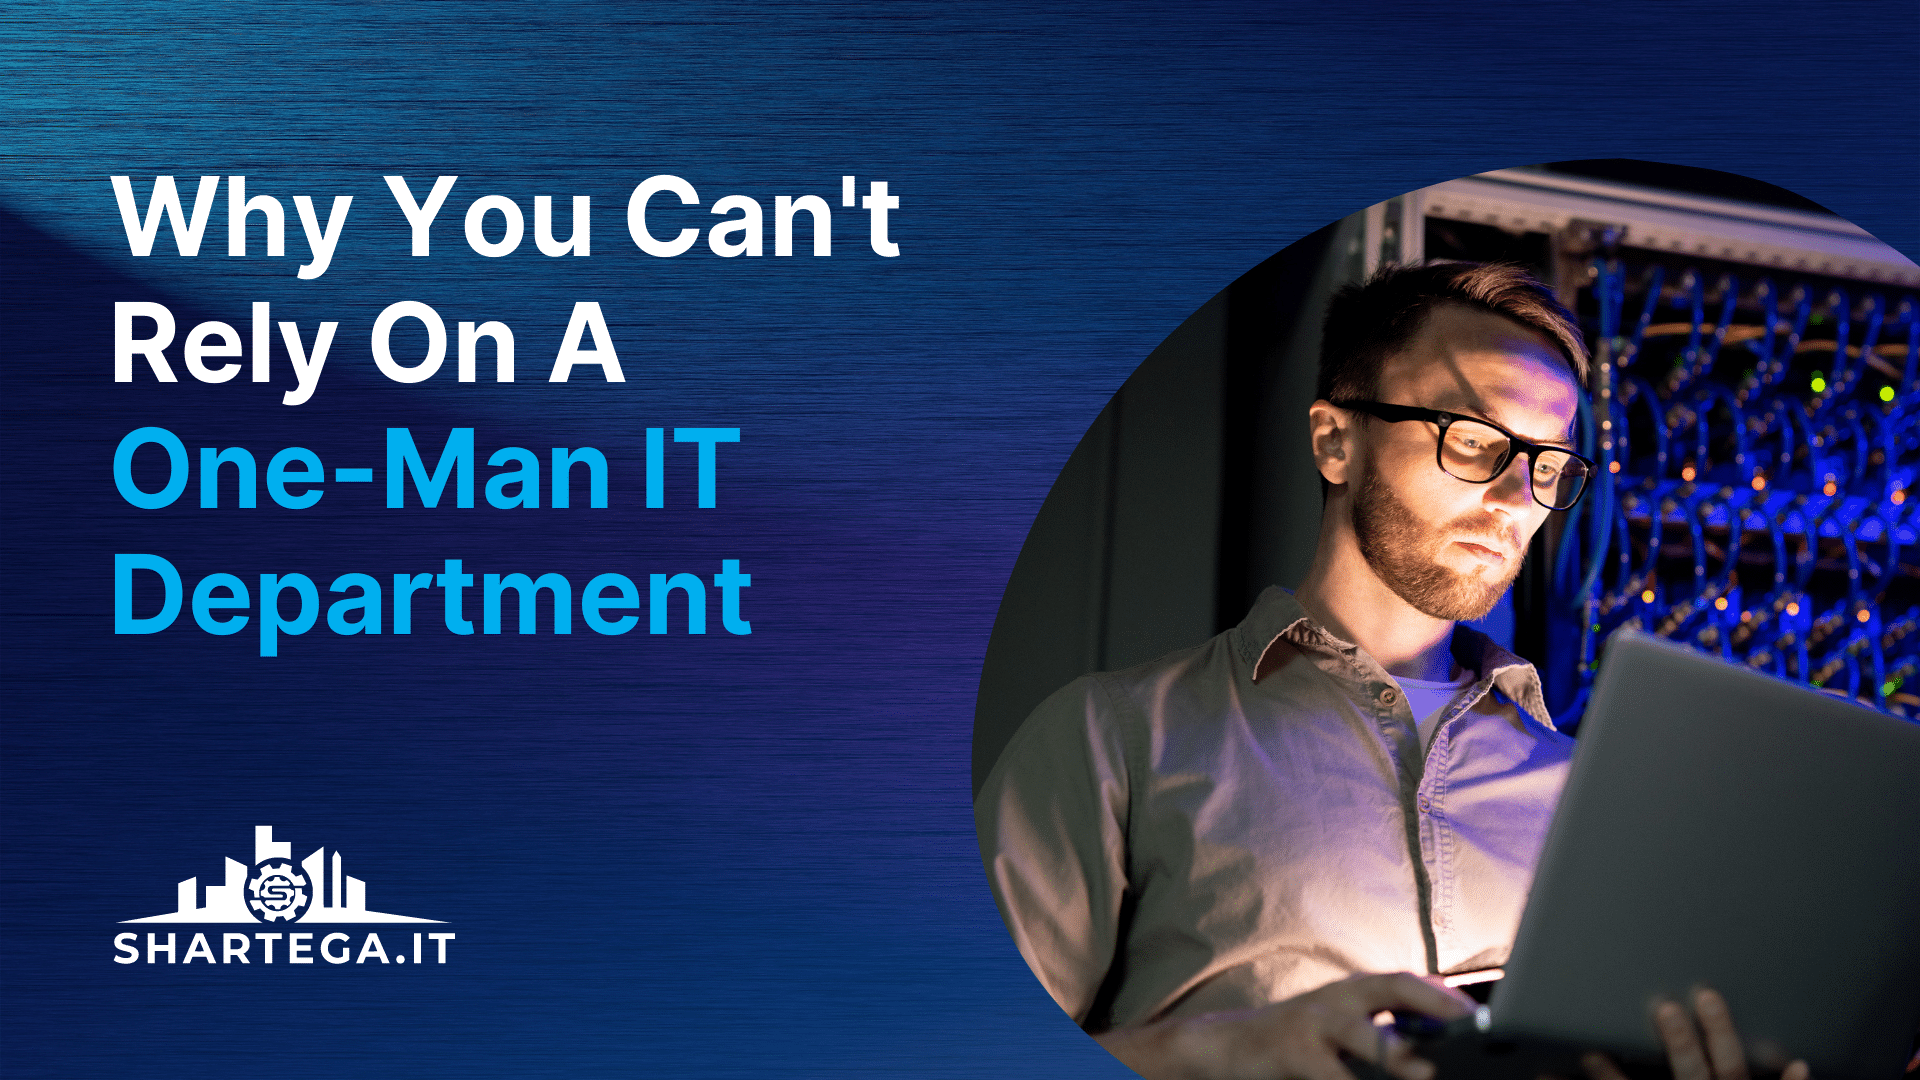 Why You Can’t Rely On A One-Man IT Department